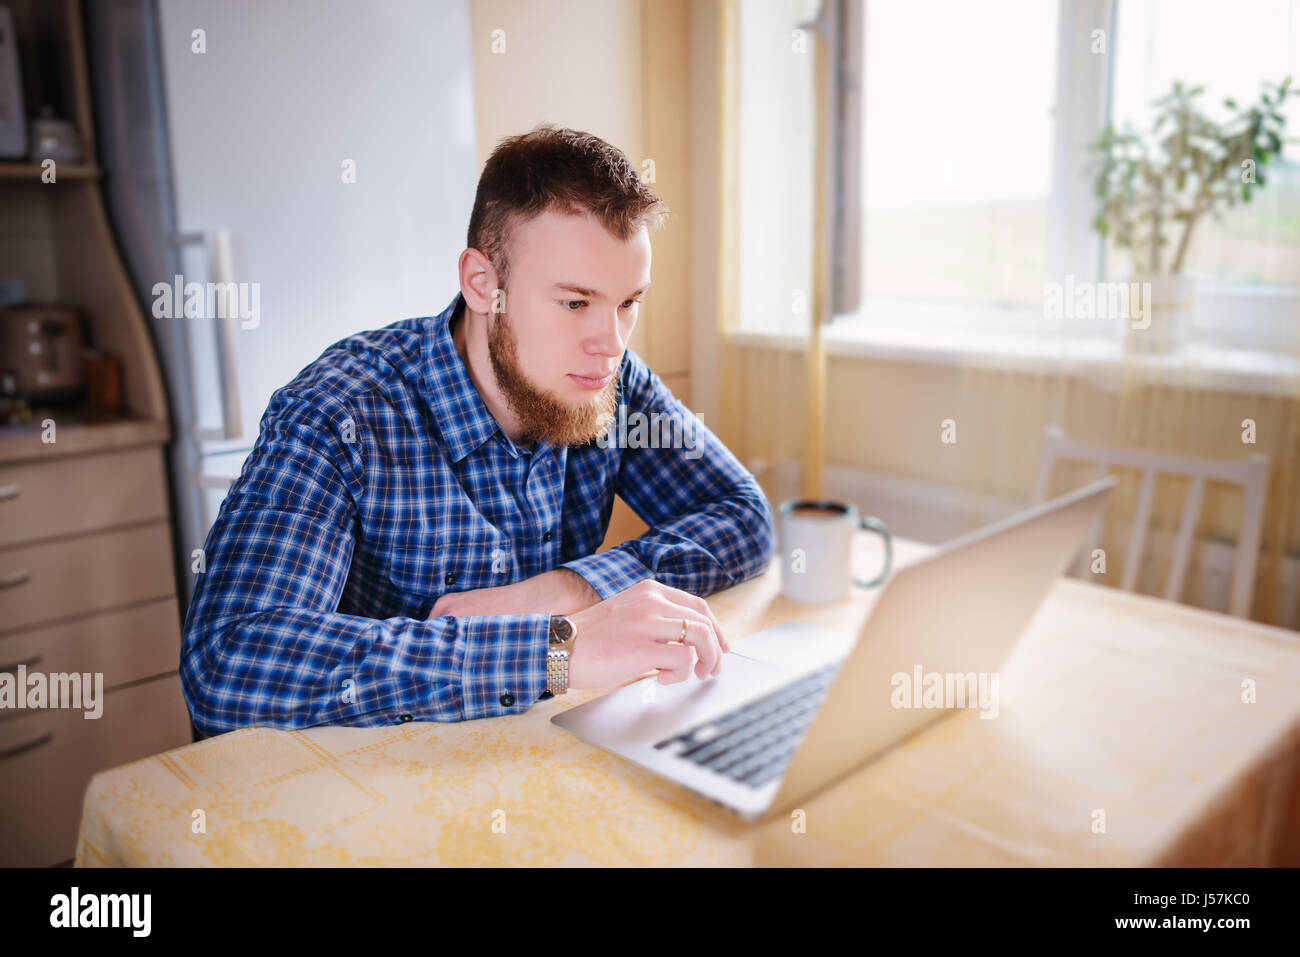 close up of executive business man with laptop working concentrated. Stock Photo